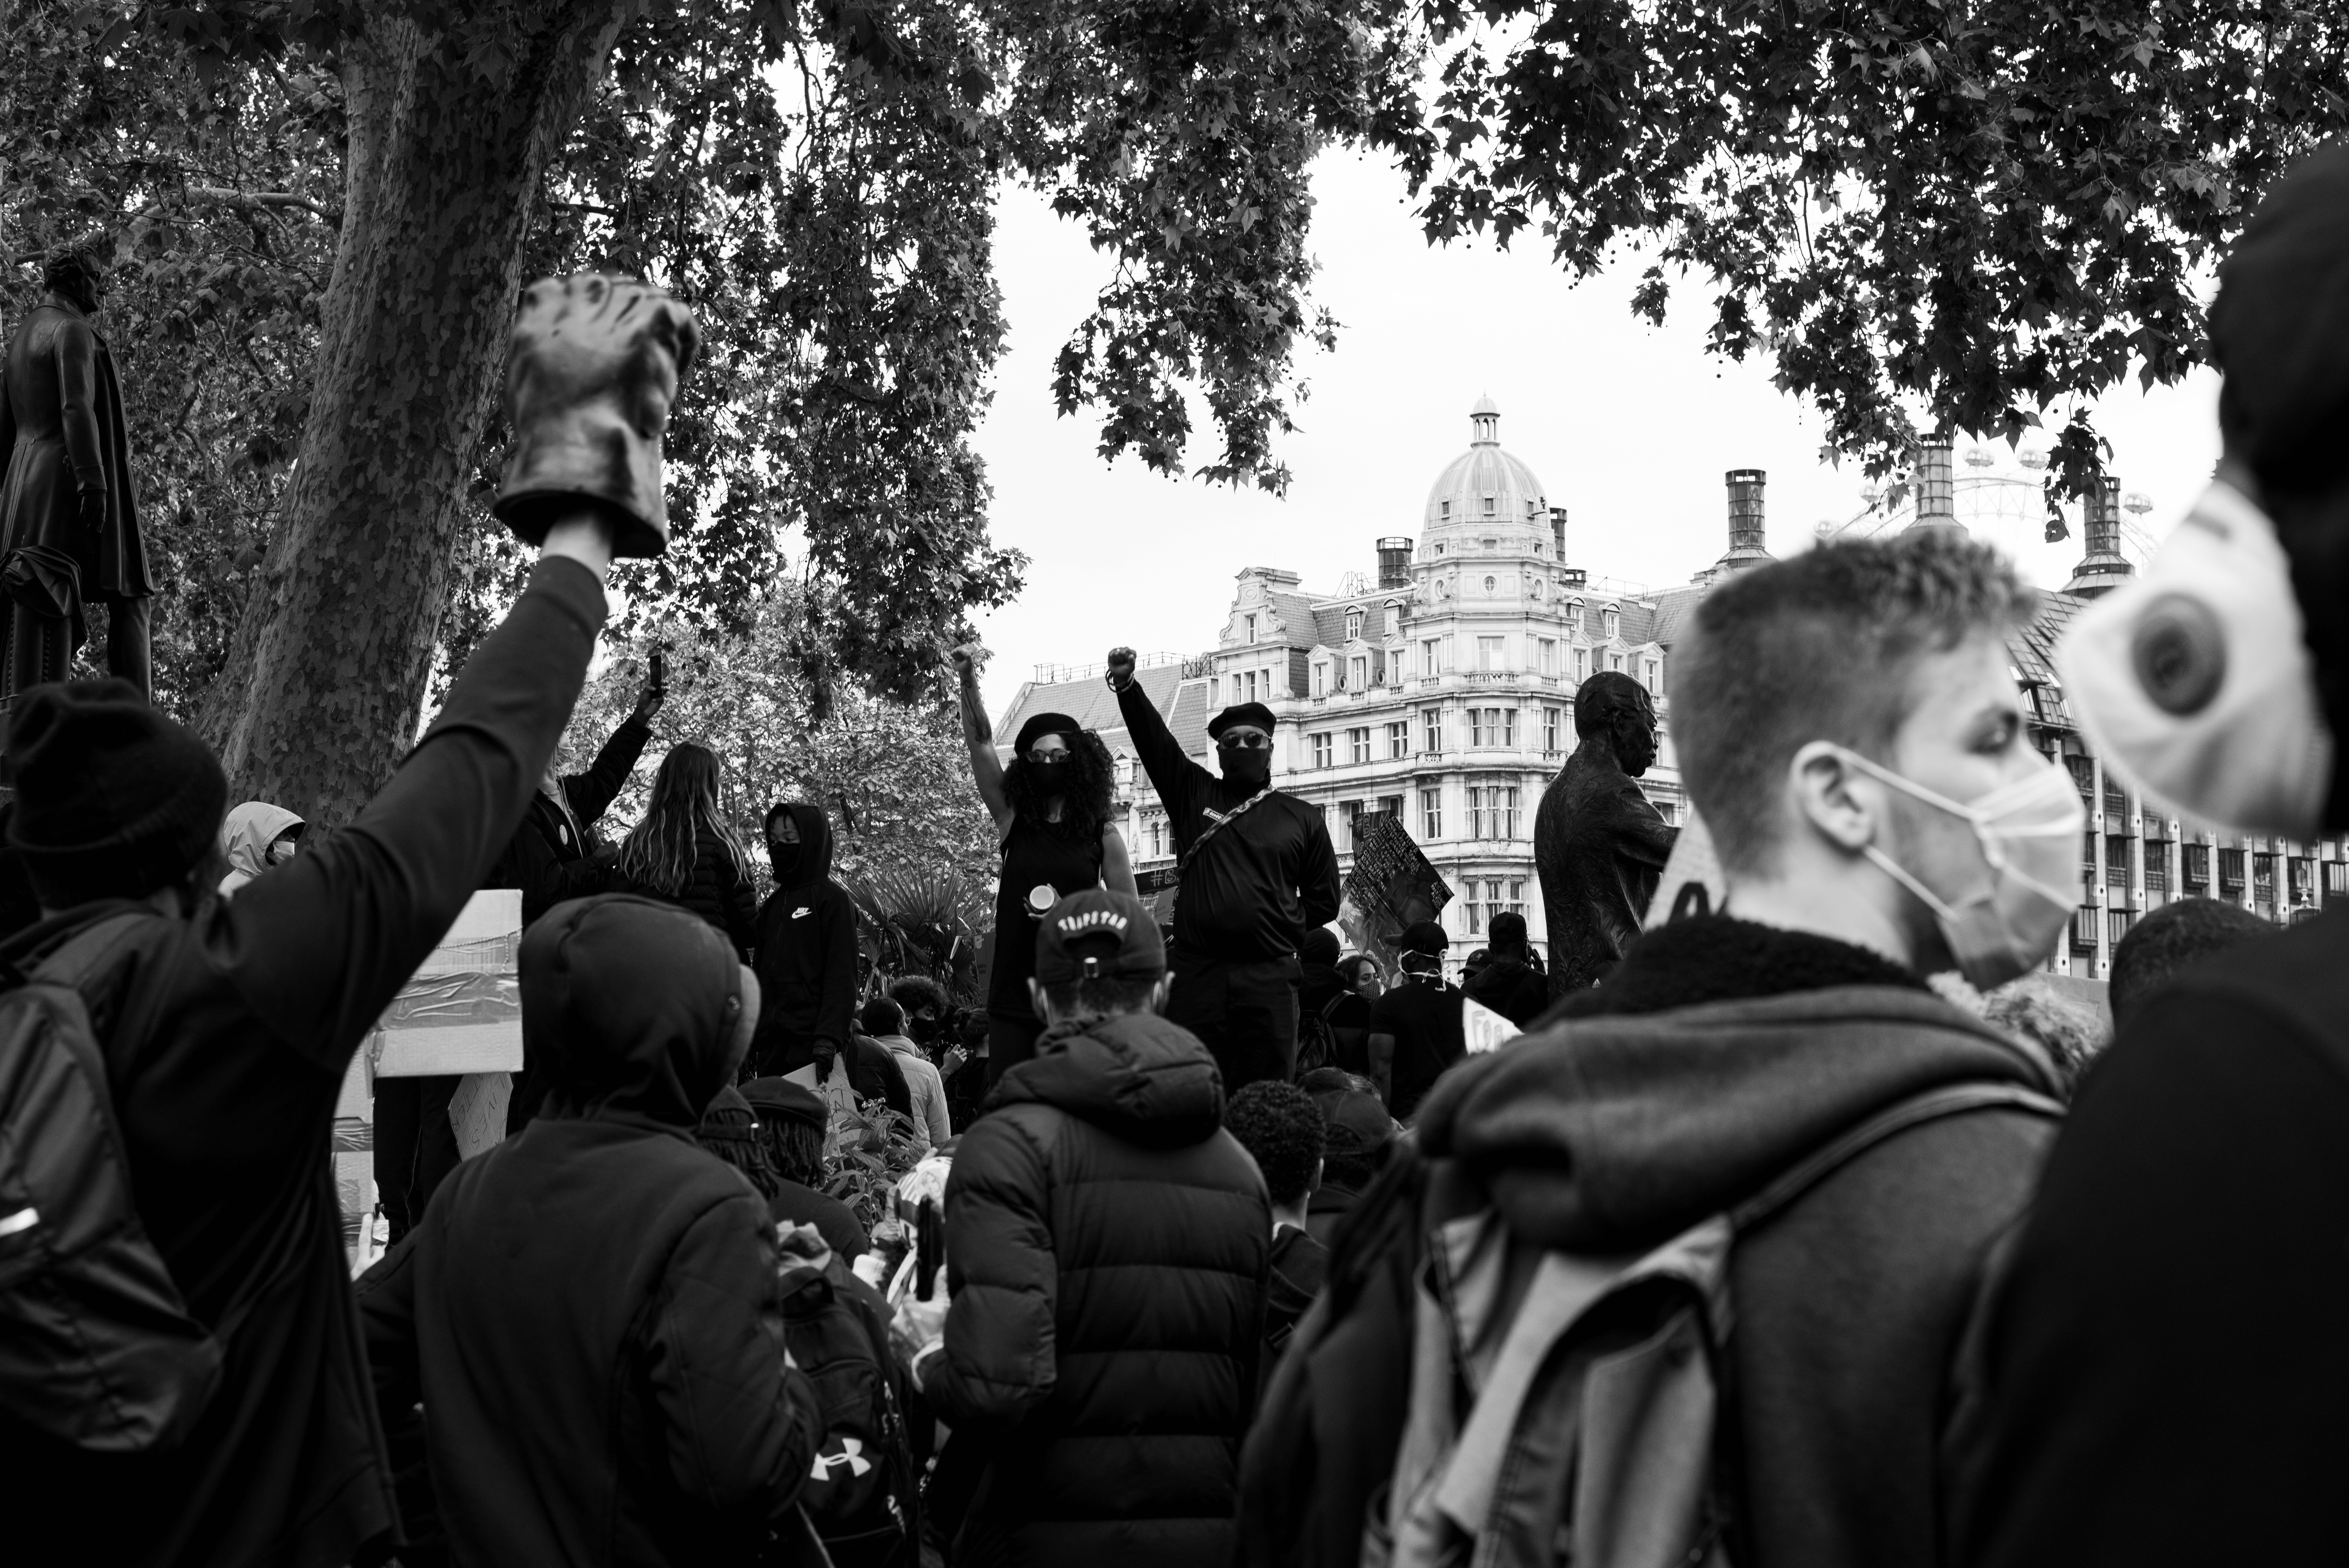 ‘London BLM March’by Jai Toor, 2020 Backshot of a gathering at the BLM protest